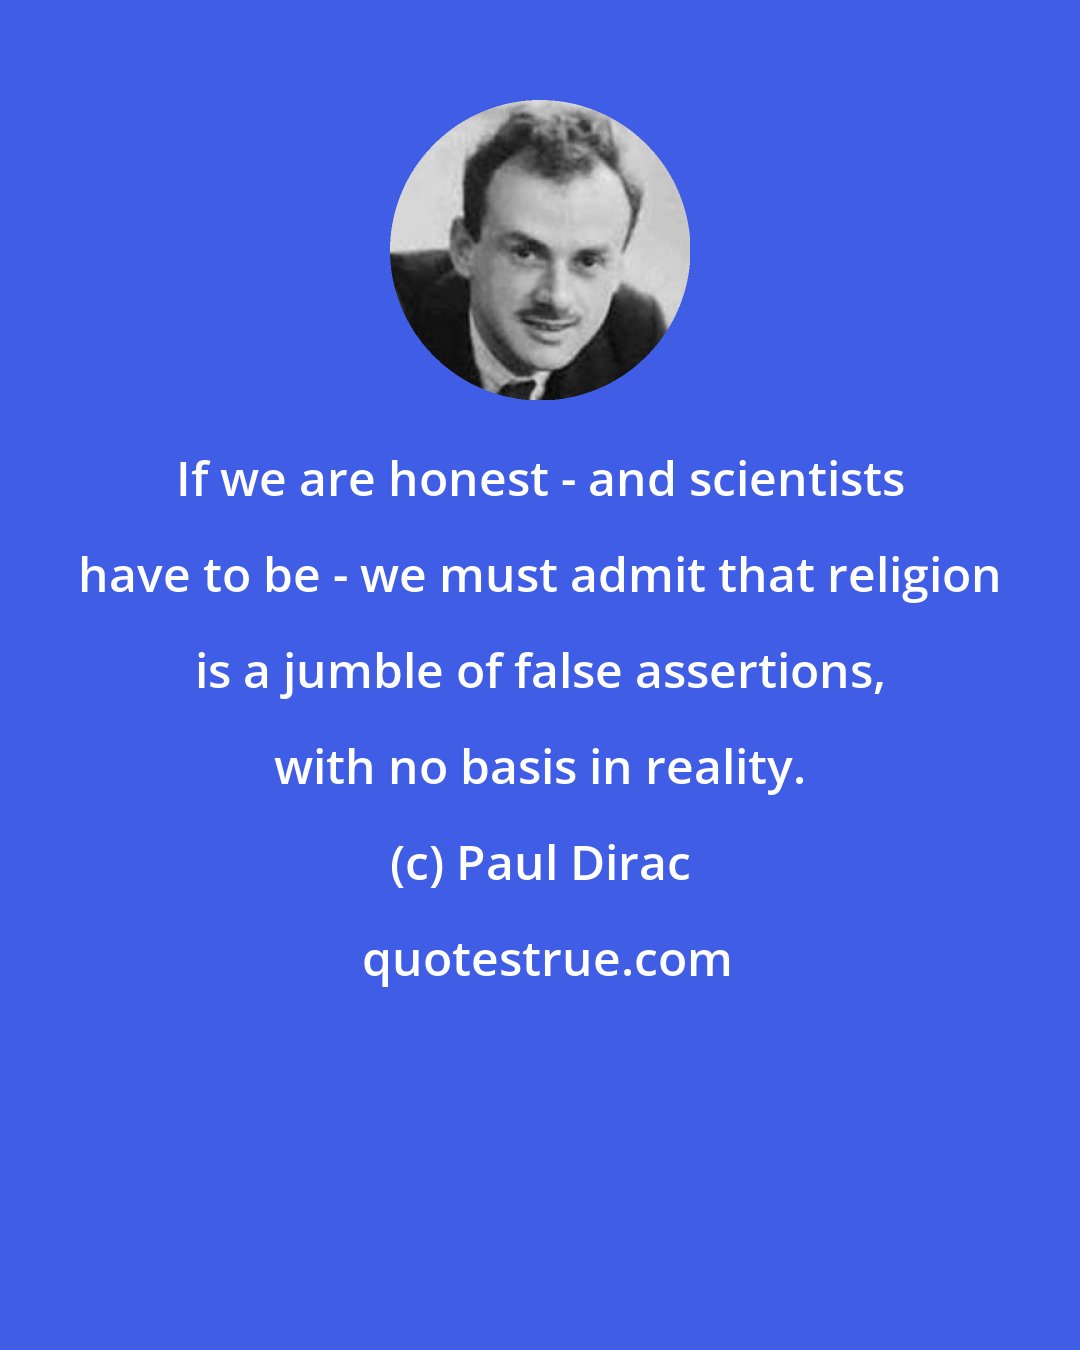 Paul Dirac: If we are honest - and scientists have to be - we must admit that religion is a jumble of false assertions, with no basis in reality.